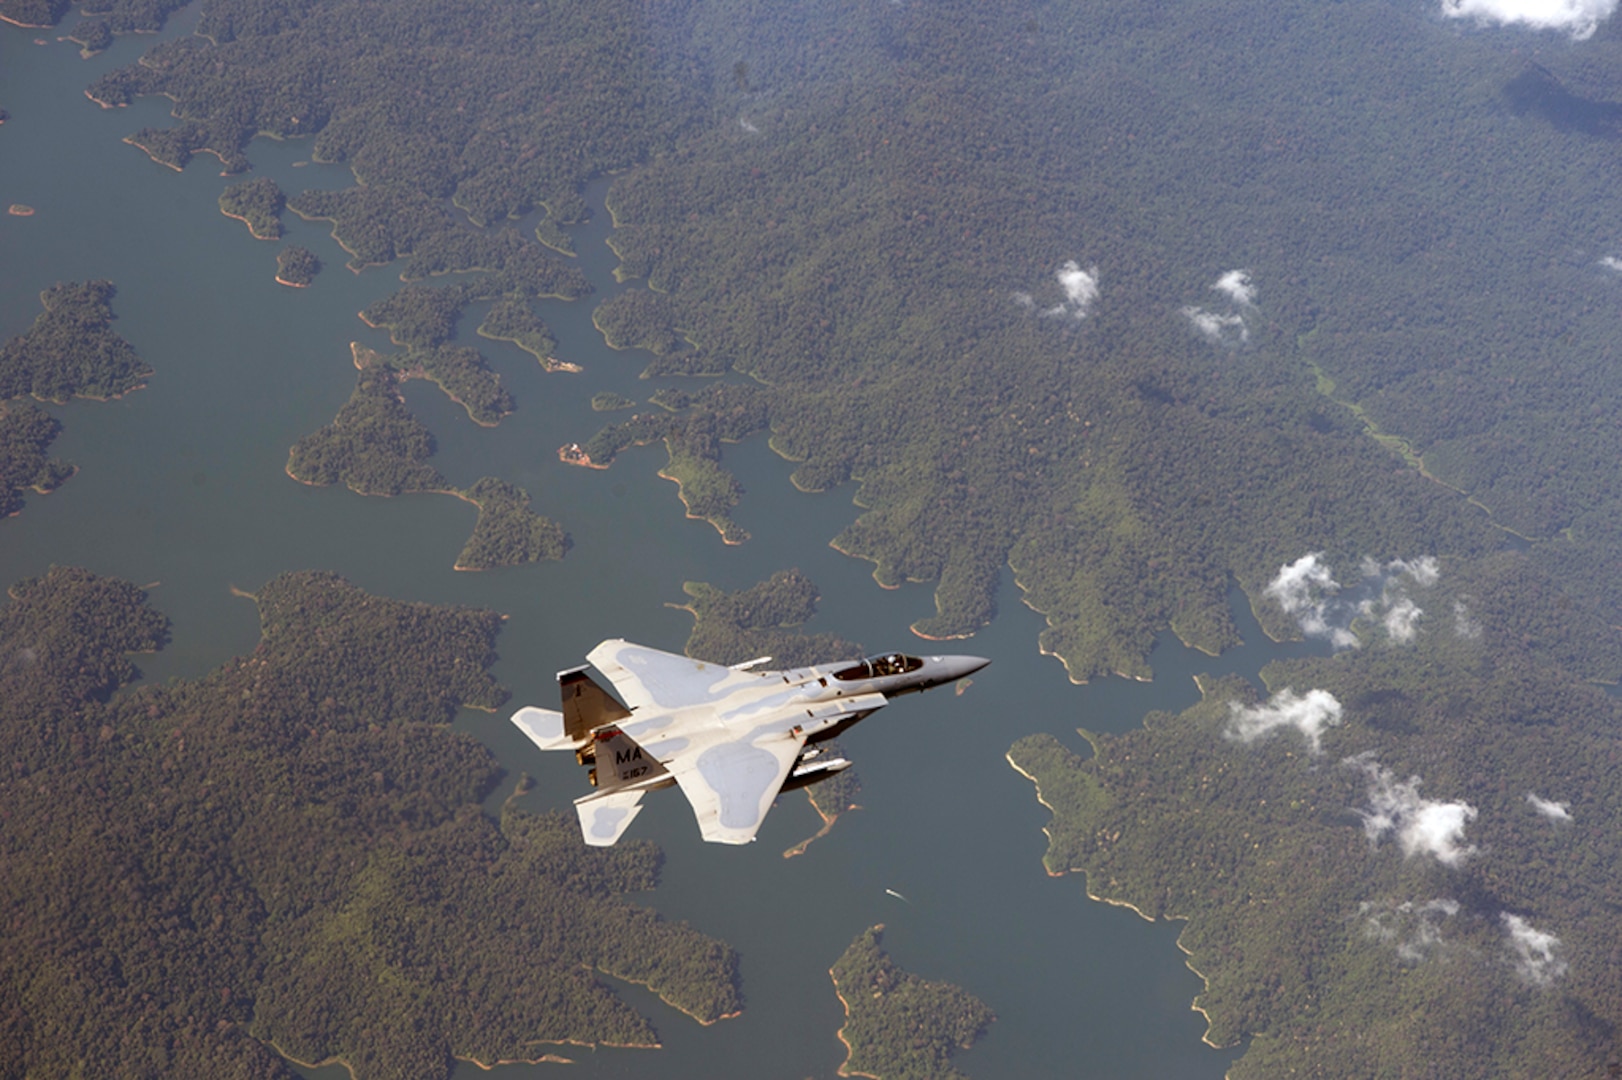 In this photo file, a U.S. Air Force F-15 Eagle from the 131st Fighter Squadron, 104th Fighter Wing, Barnes Air National Guard Base, Mass., flies over Penang, Malaysia, during Cope Taufan 14, June 18, 2014. Cope Taufan is a biennial large force employment exercise taking place June 9 to 20 designed to improve U.S. and Malaysian combined readiness. 